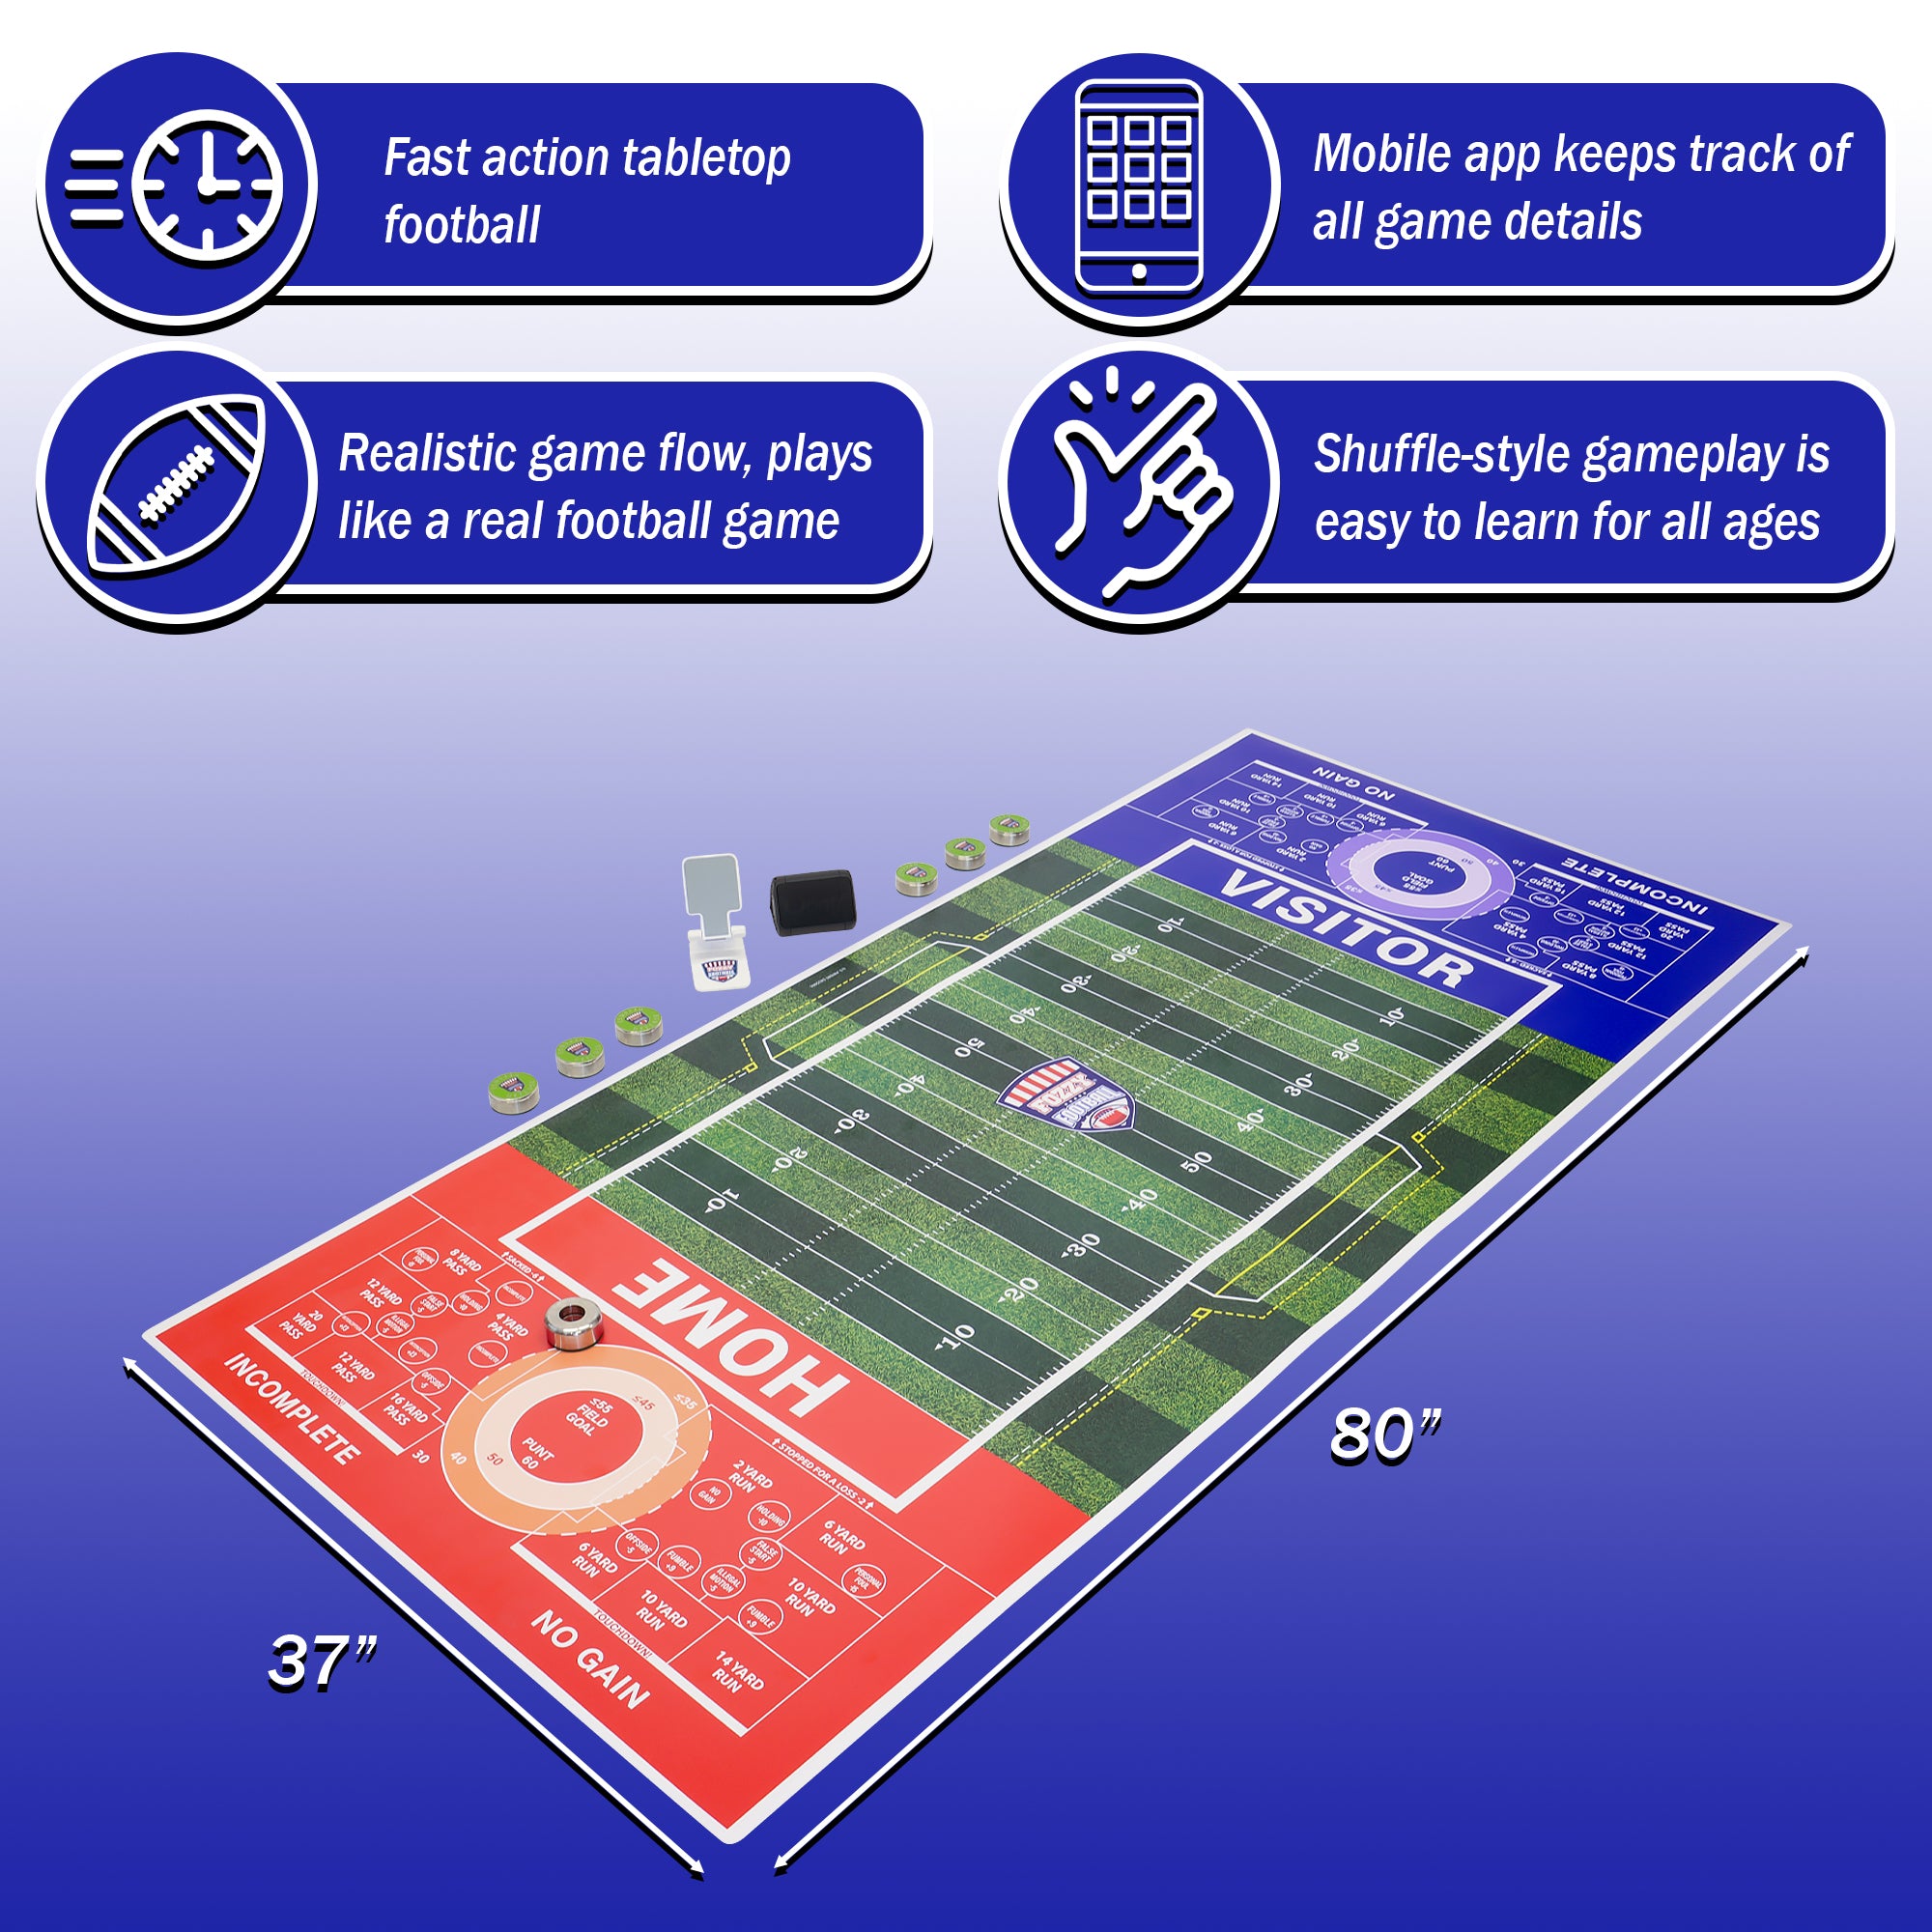 Fozzy Football Tabletop Set benefits and size 37x80